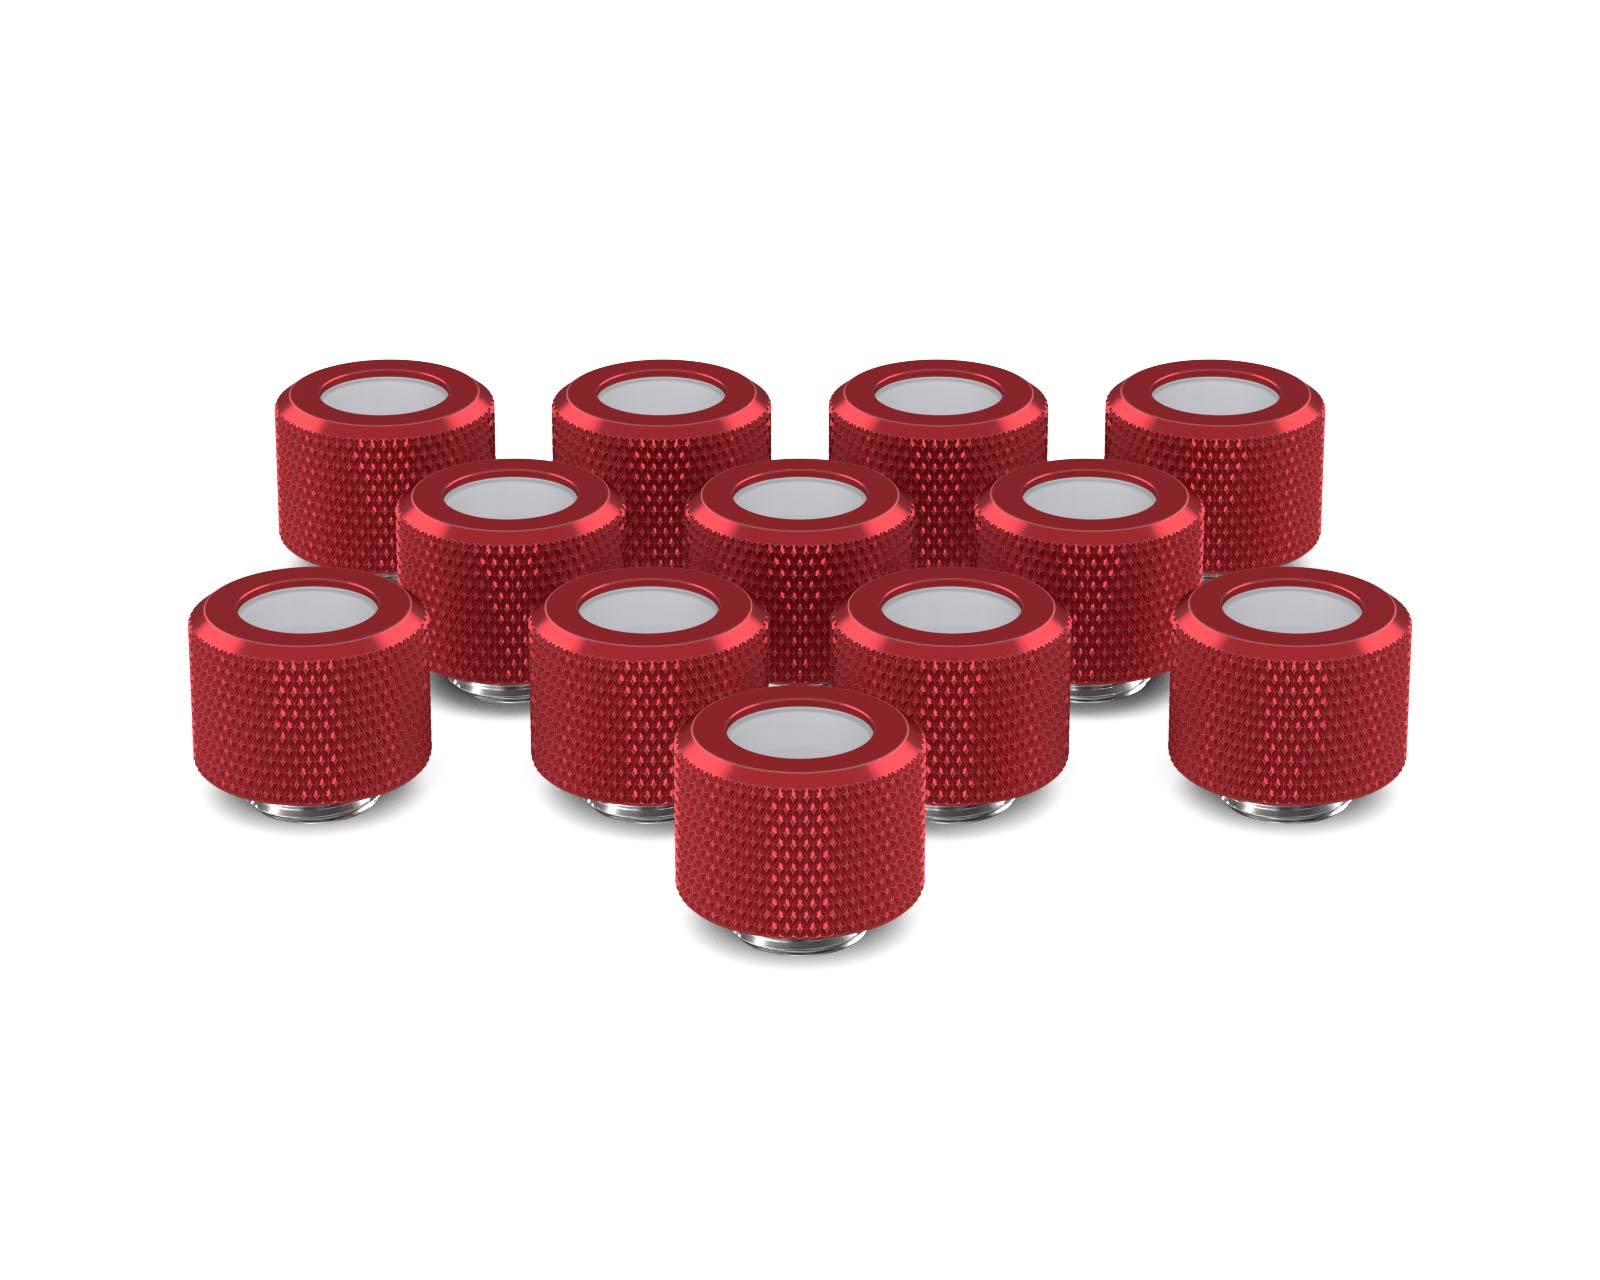 PrimoChill 12mm OD Rigid SX Fitting - 12 Pack - PrimoChill - KEEPING IT COOL Candy Red